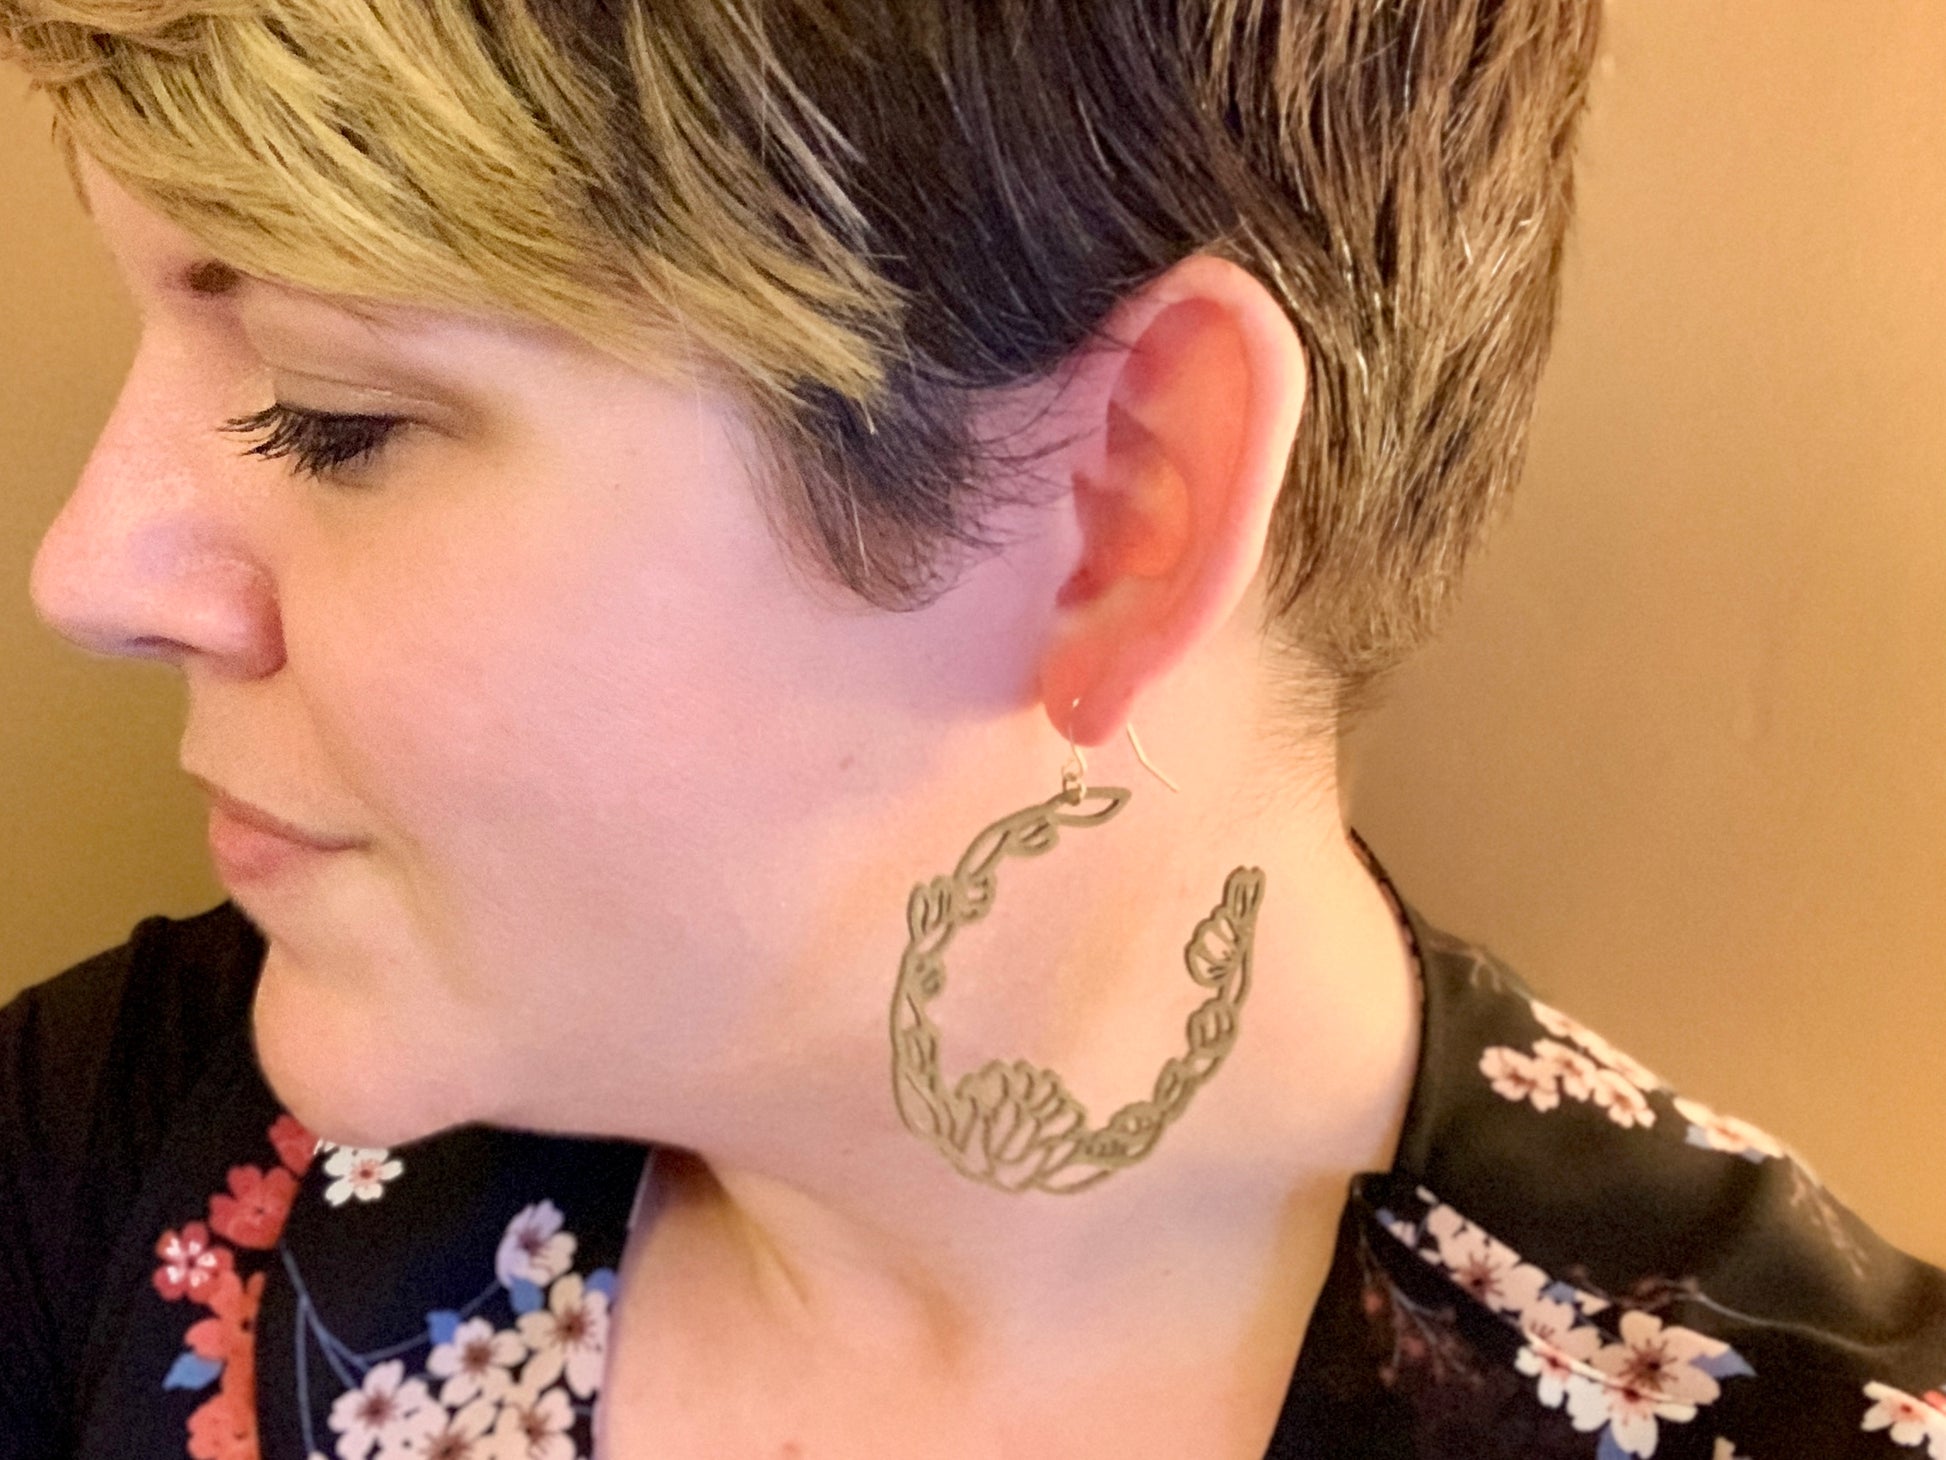 A woman is shown in profile looking away from the camera wearing a R+D 3D printed earring. It is a gold filament with blooms and leaves layered together to form a floral wreath hoop. 